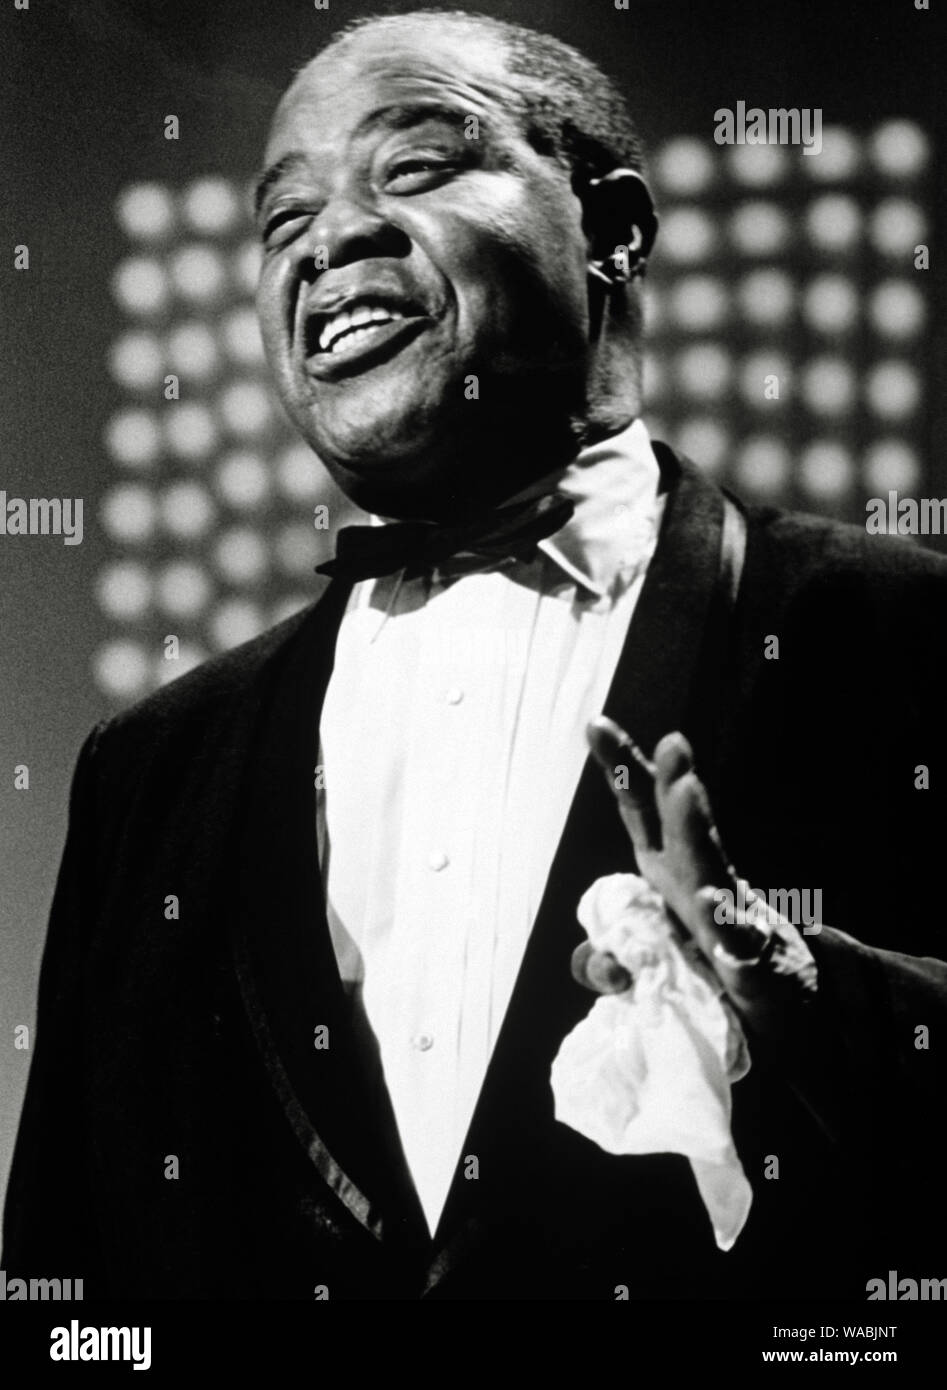 Louis Armstrong, 'The Dean Martin Show' (1965) NBC  File Reference # 33848-201THA Stock Photo